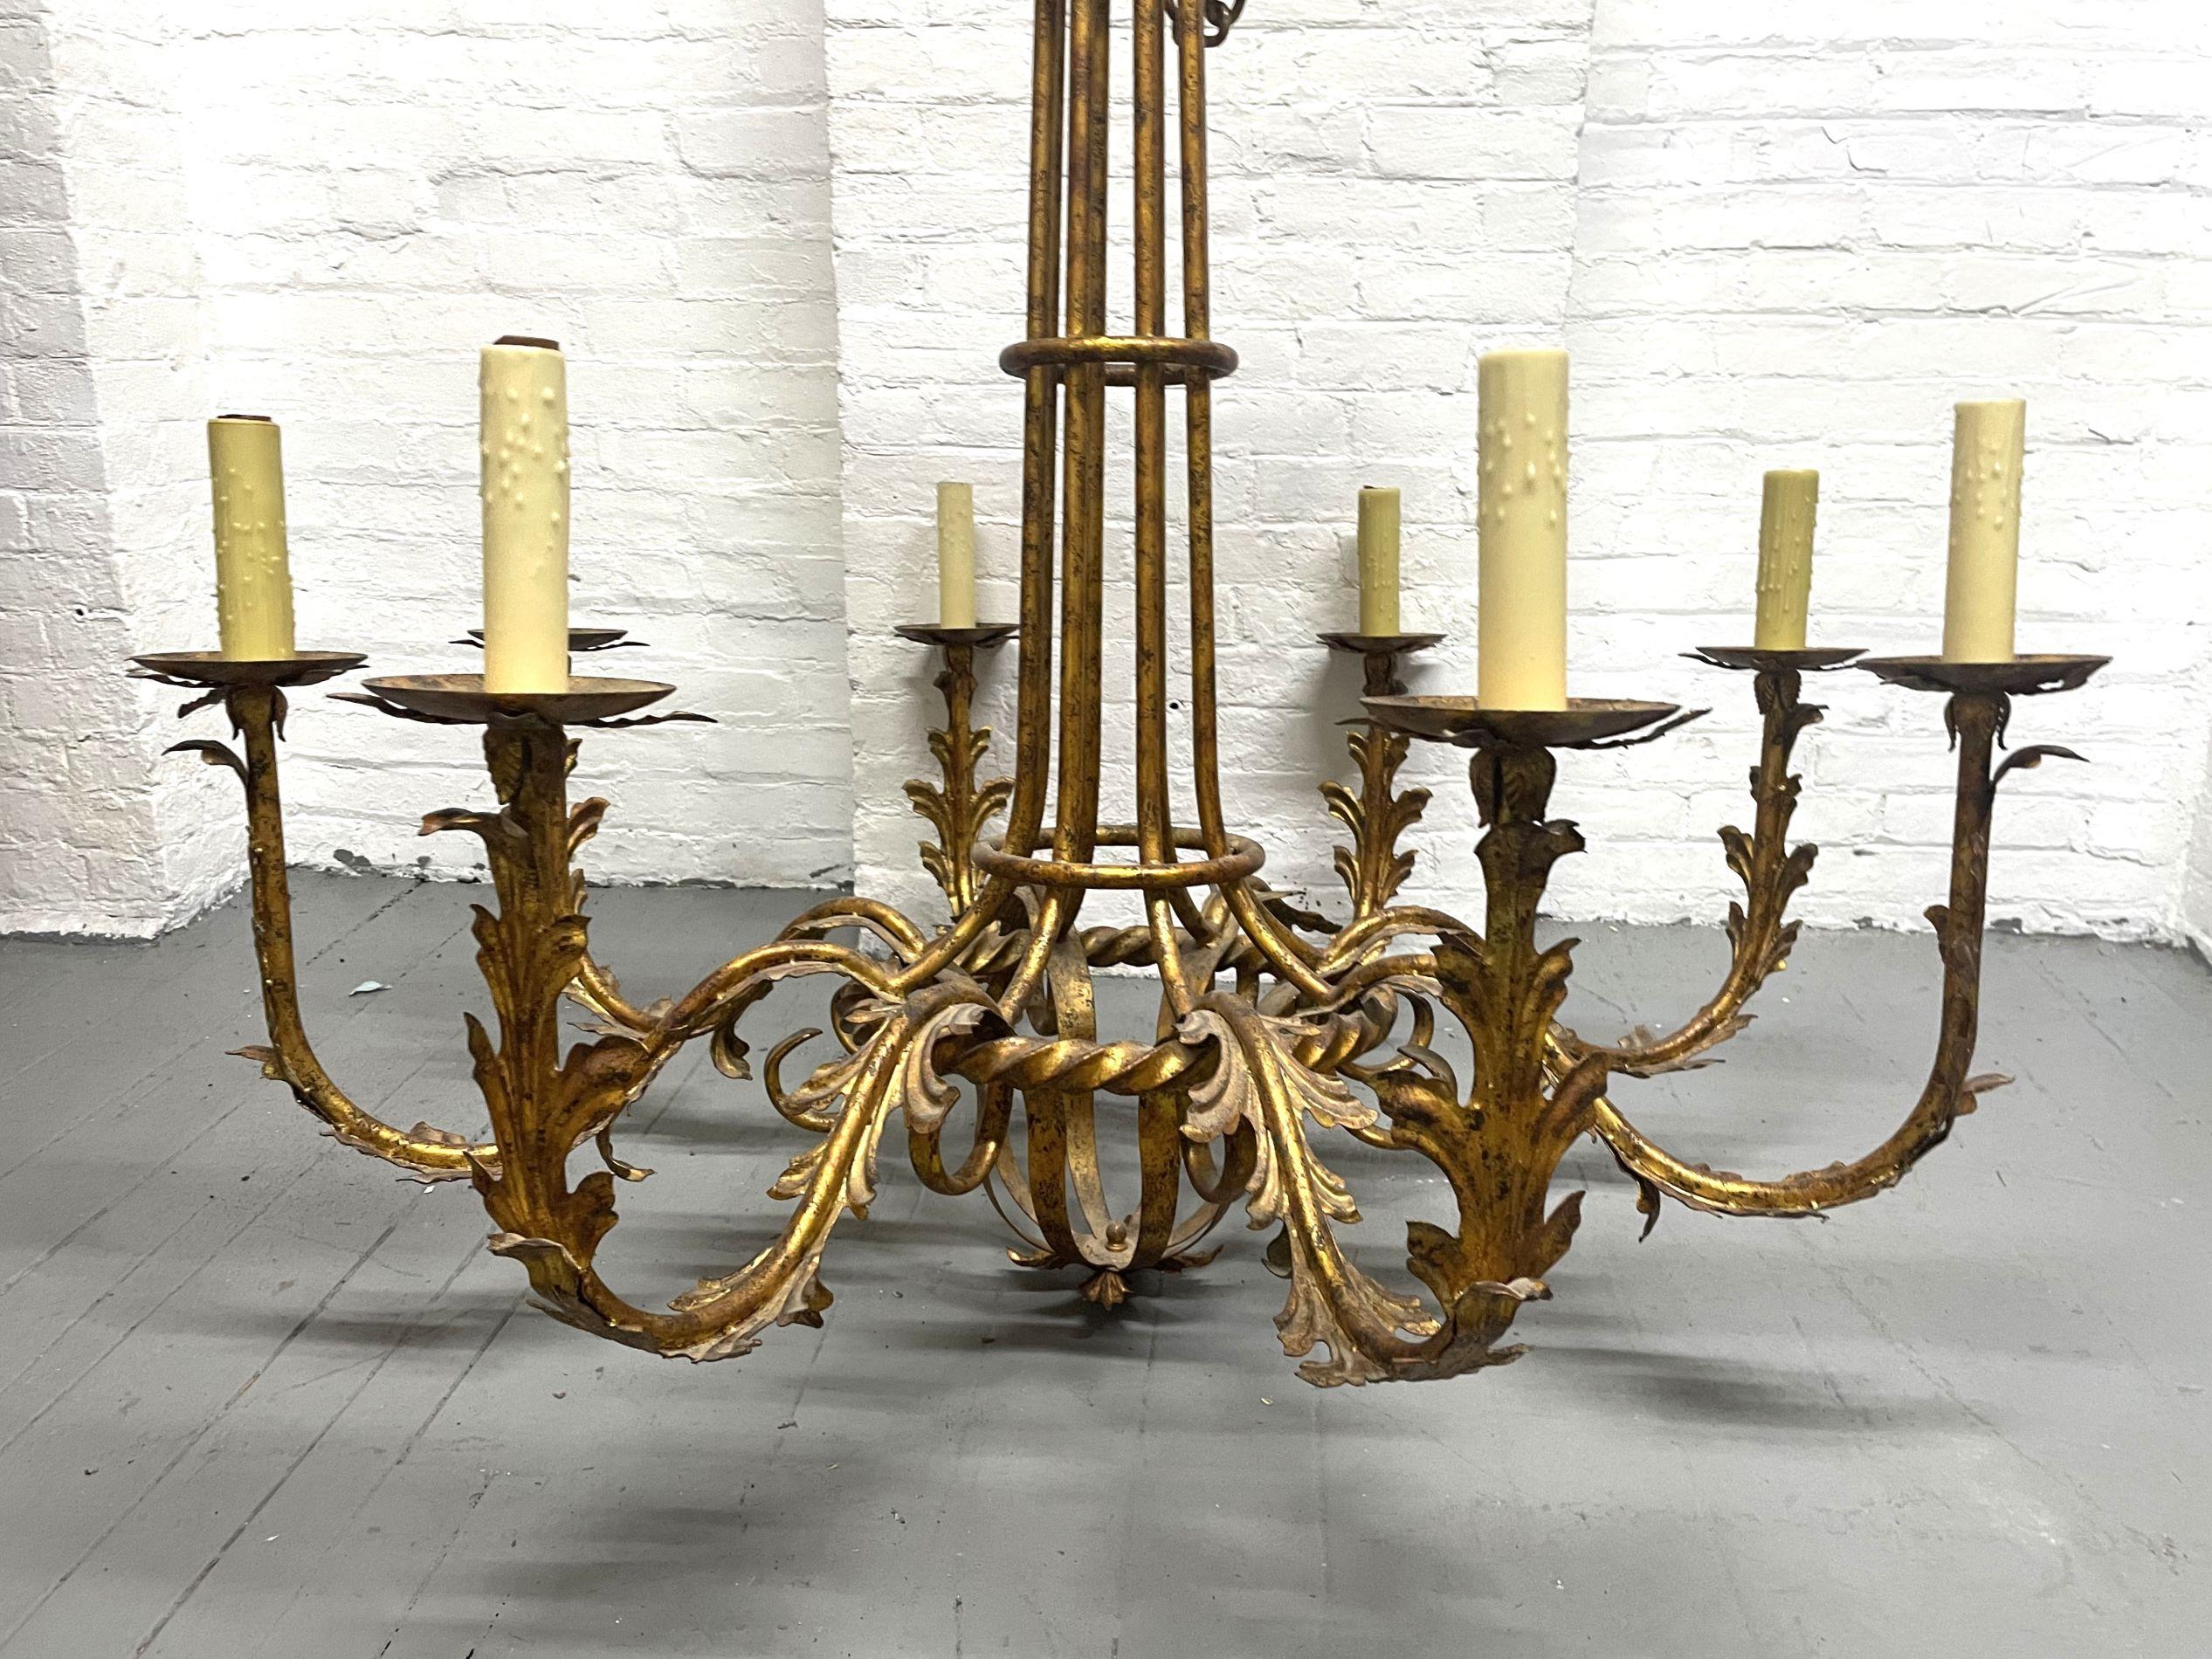 Pair of Large Gilt Metal 8 Arm Chandeliers.  Each arm has a floral pattern.